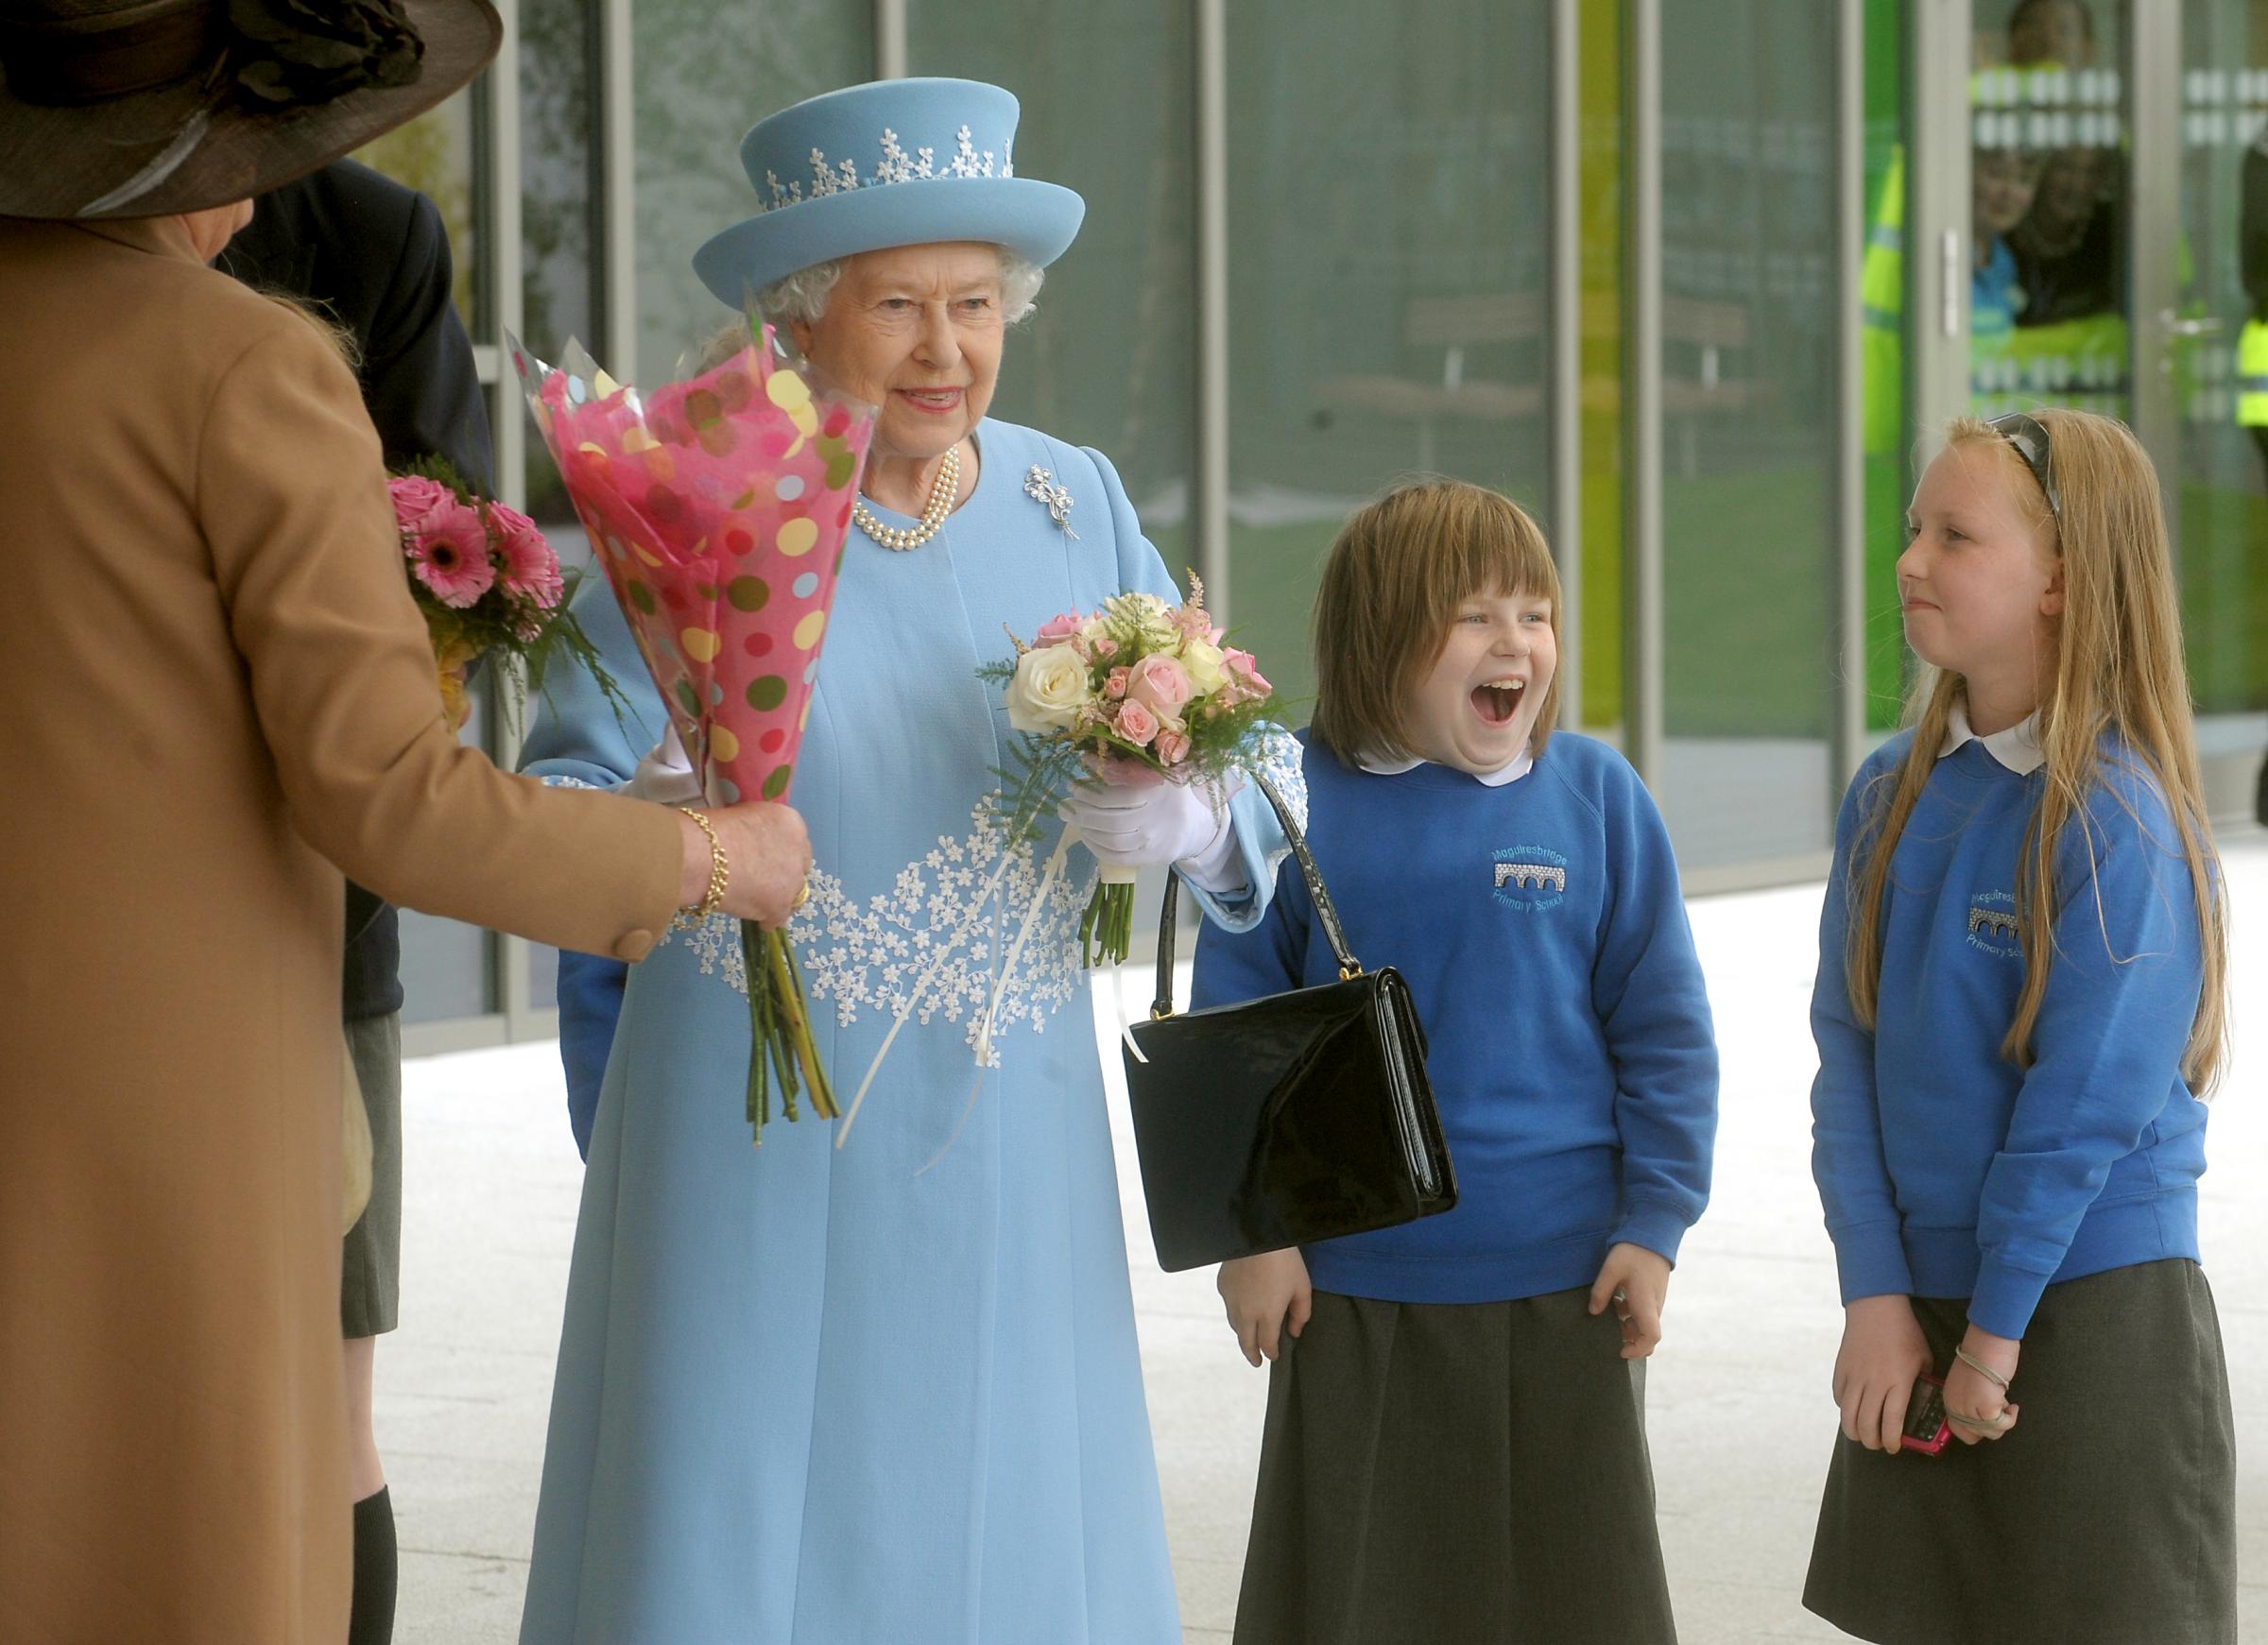 Queen Elizabeth on her visit to the official opening of The South West Acute Hospital in 2012.